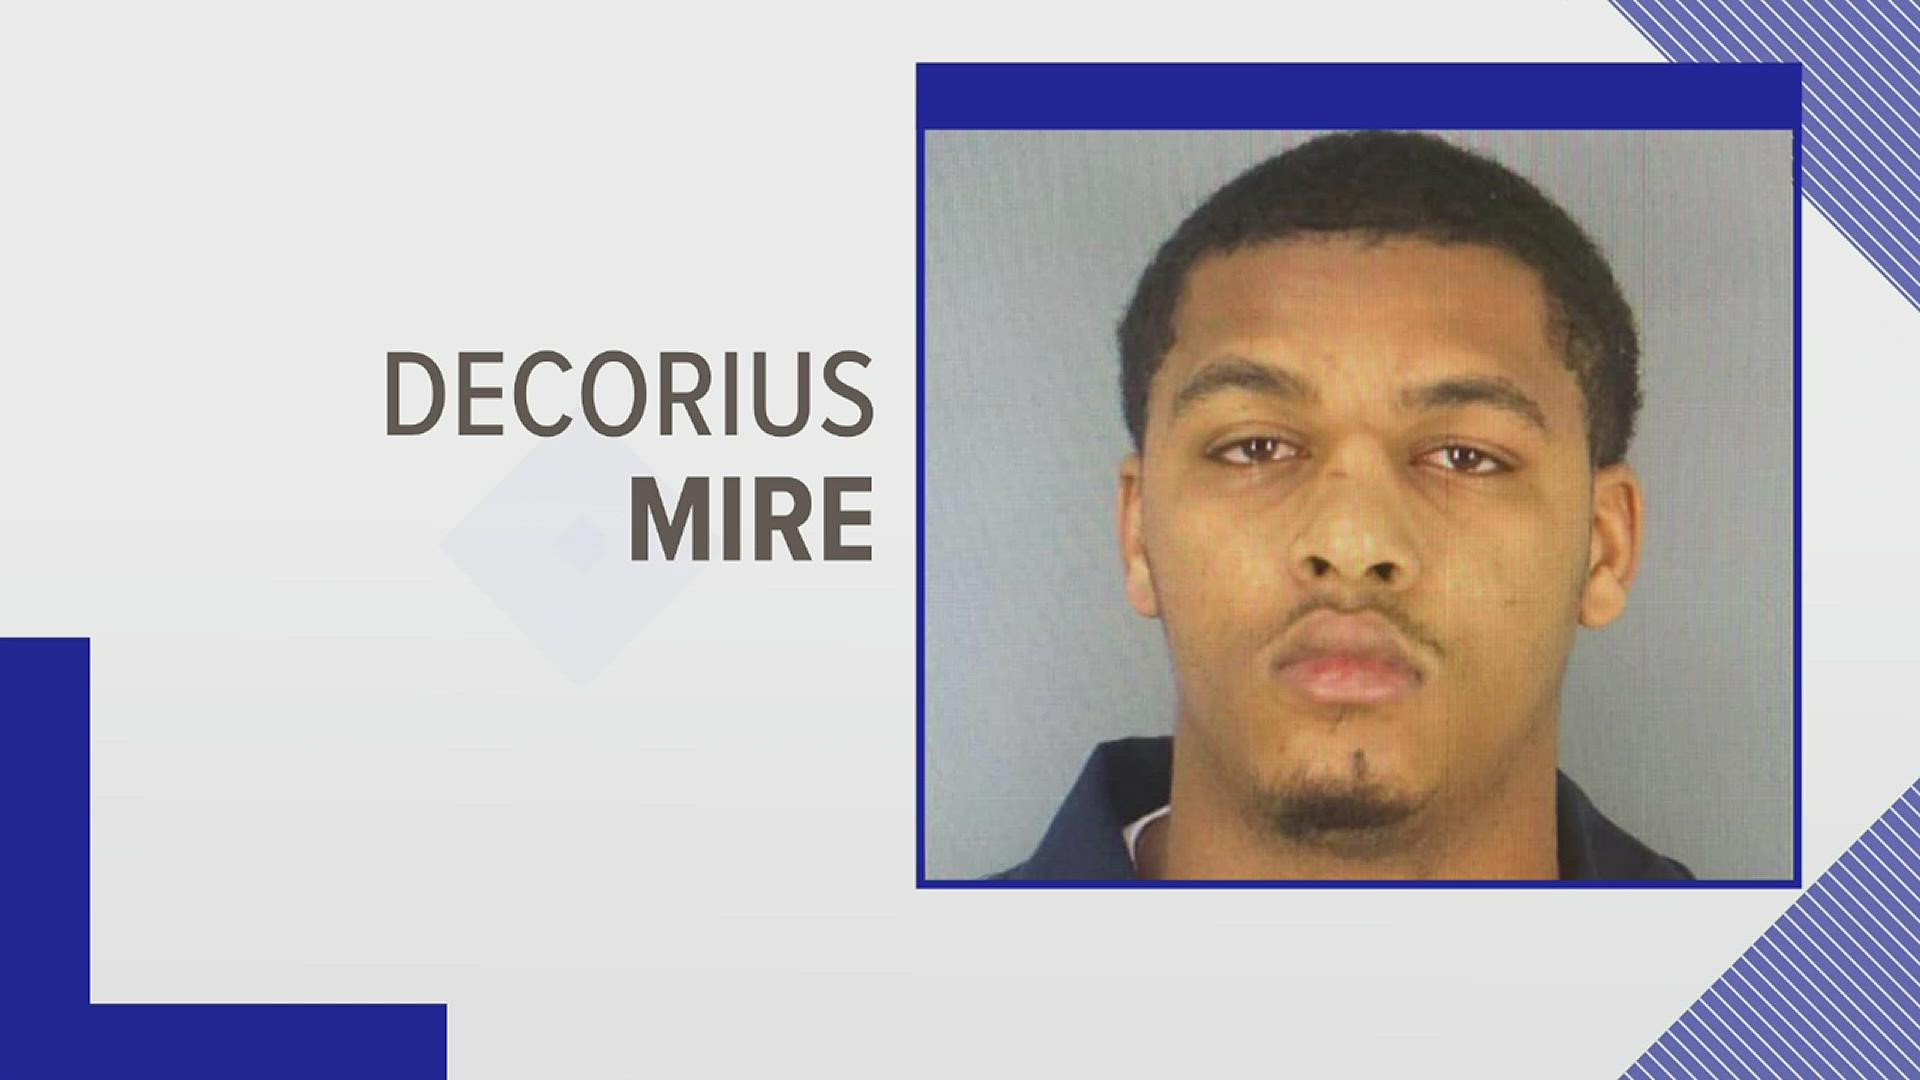 Decorius Mire filmed the cats torture and death on his cell phone and posted the video to his social media accounts.